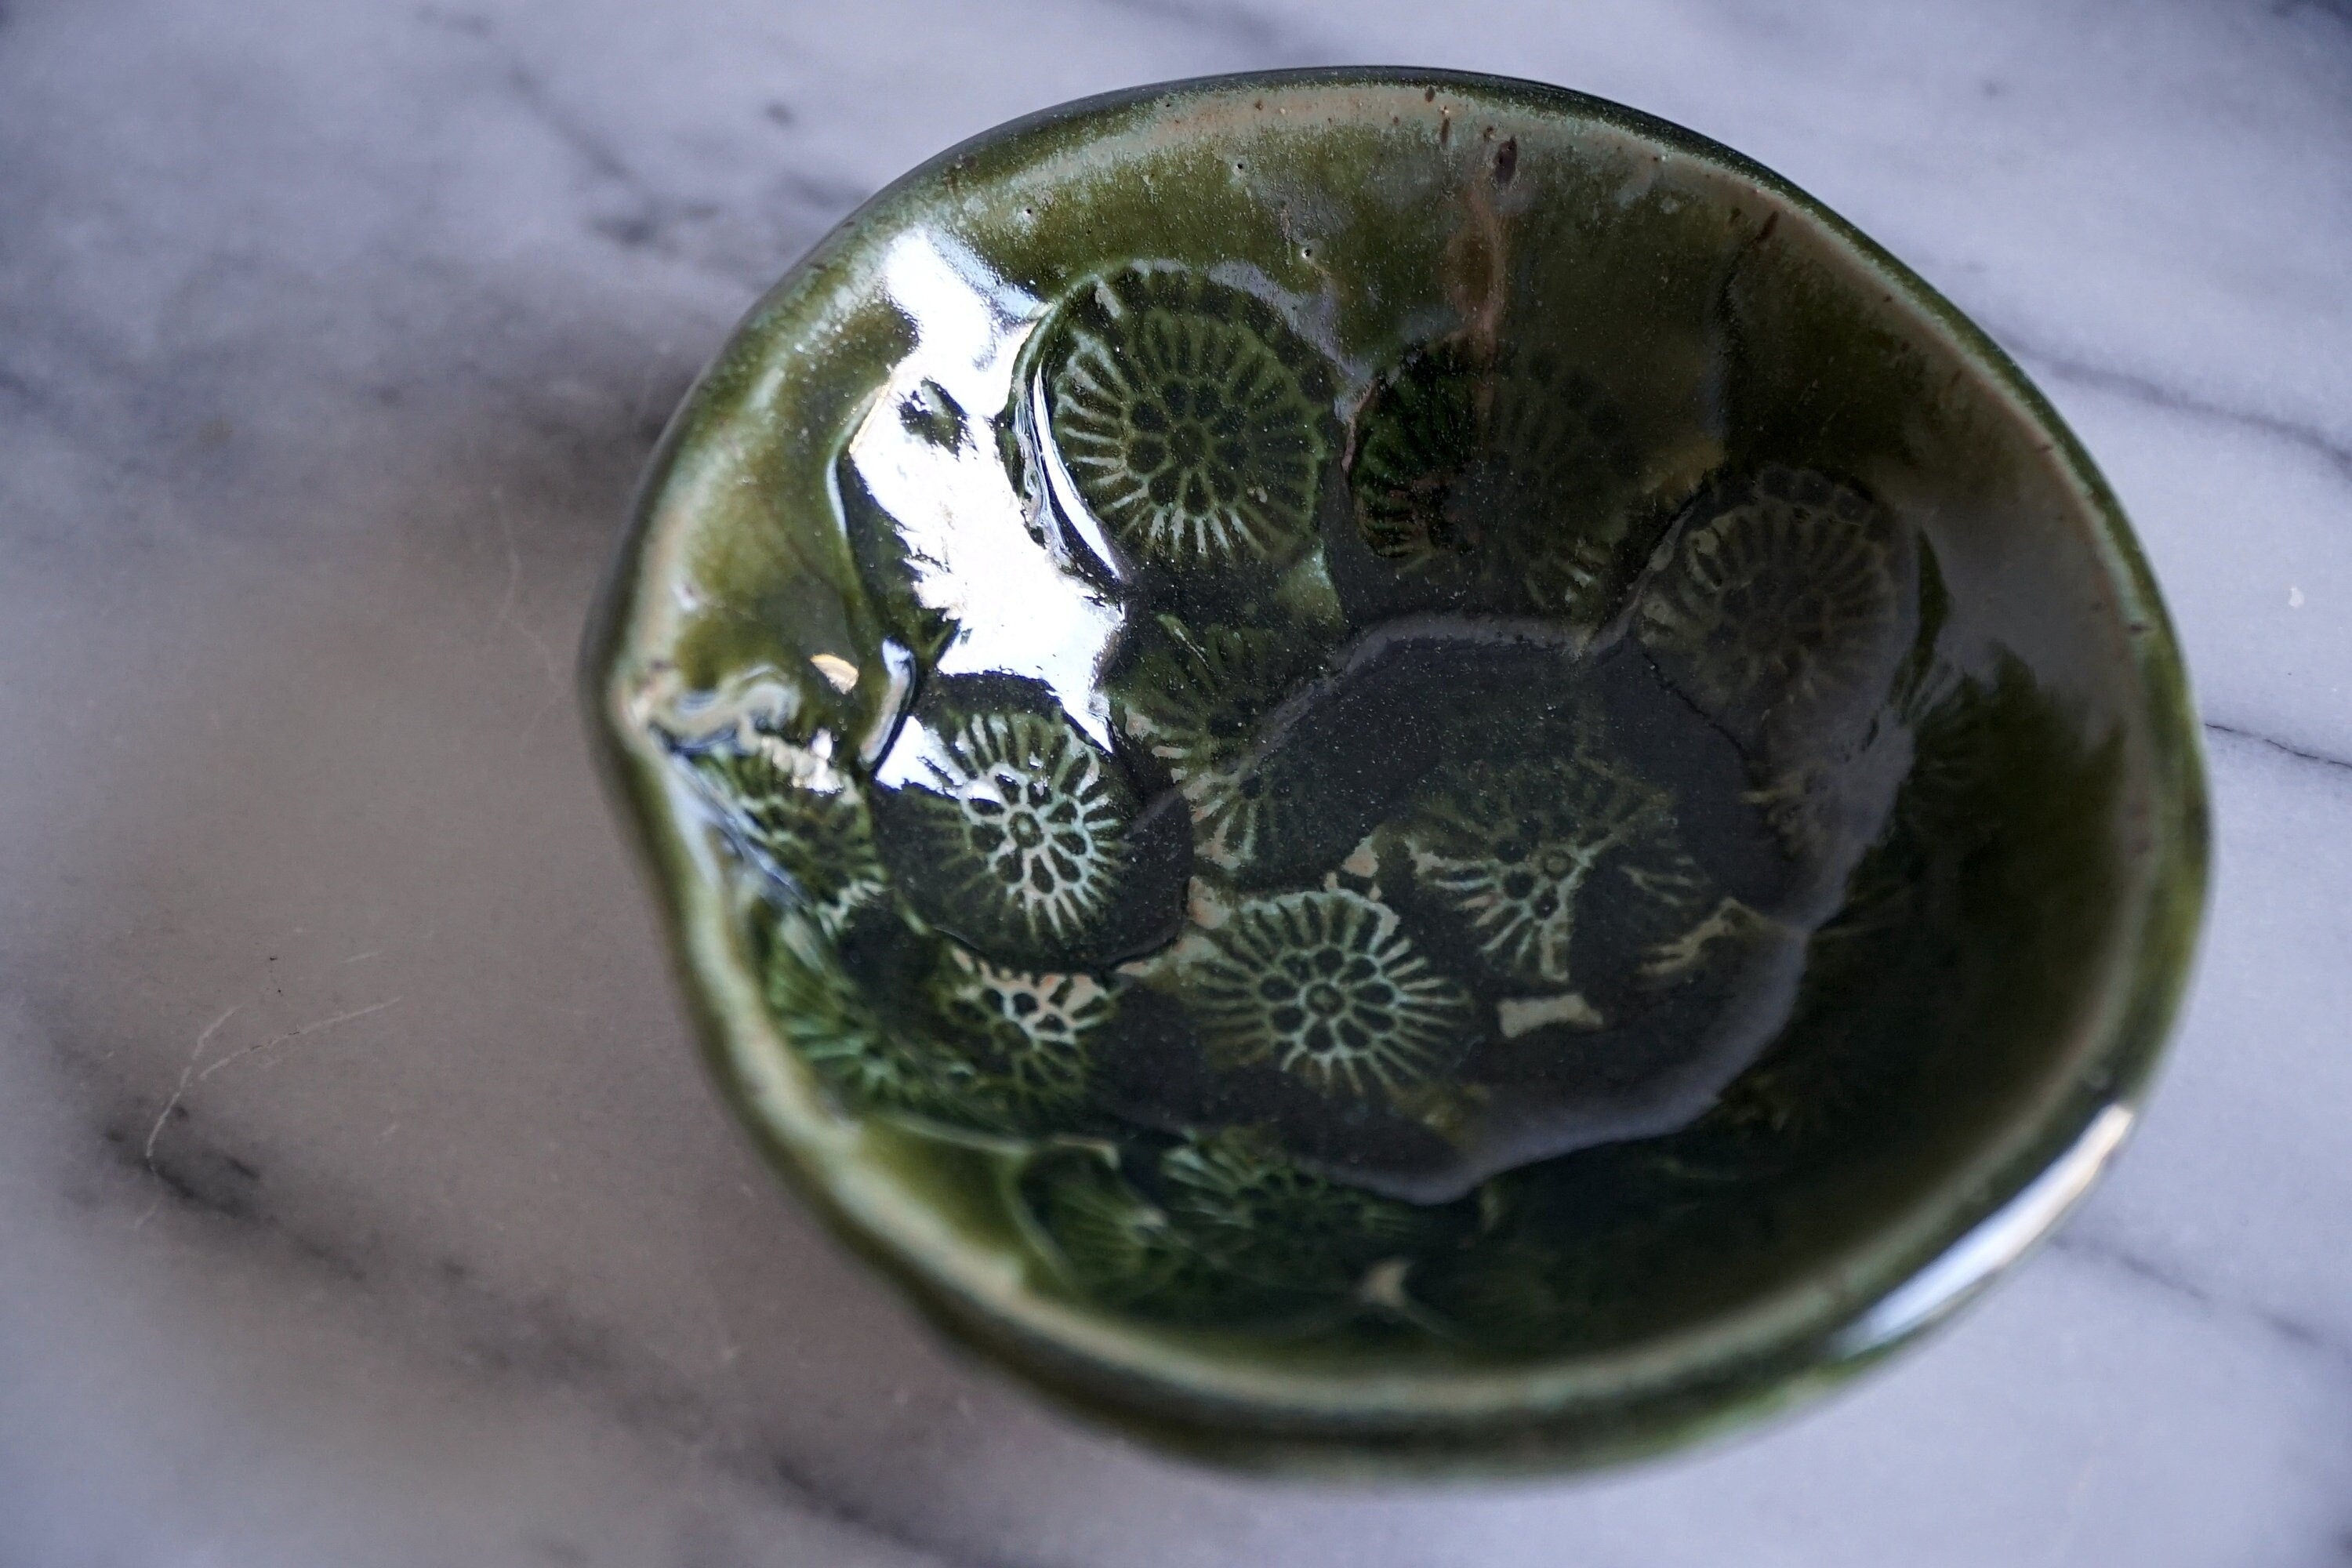 Glimmering Green Stamped Stoneware Bowl - Small Bowl - Stamped Dish - Catch-All - Jewelry Storage - Food Safe - Deco Green Glazed Bowl